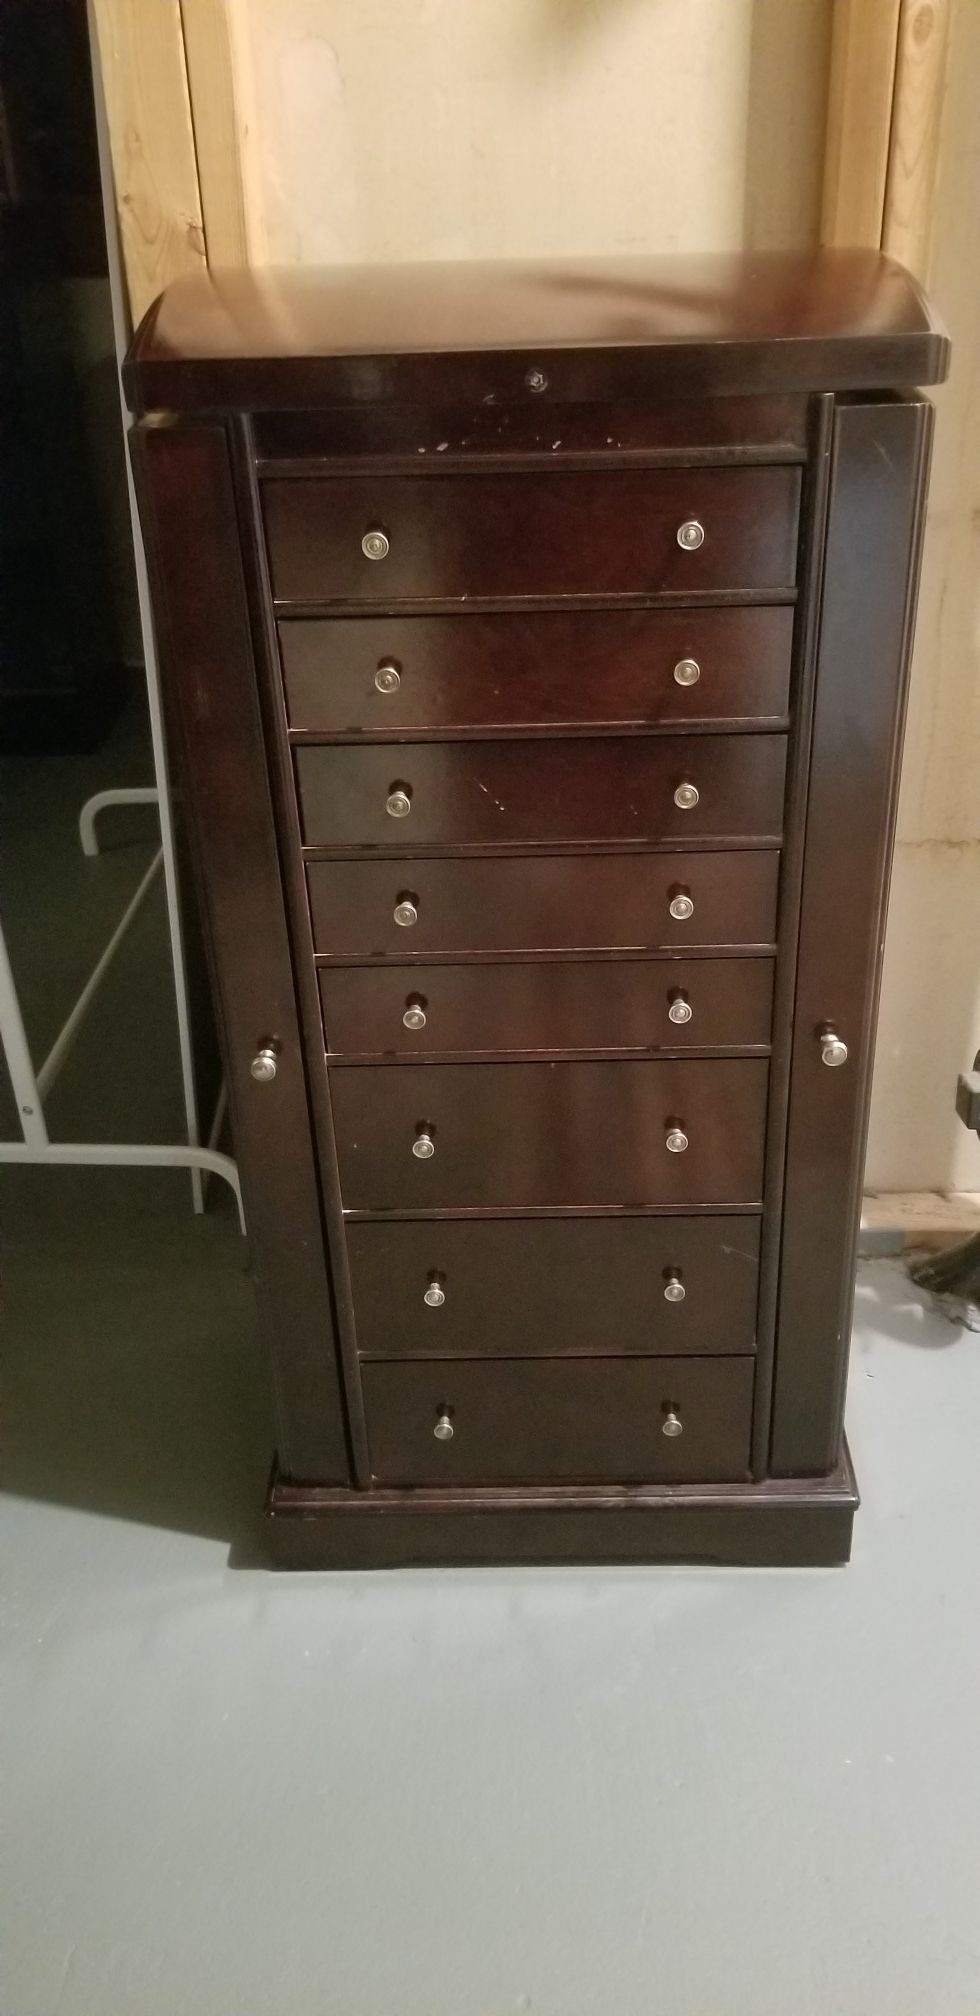 FREE - Cherry Wood Jewelry Cabinet (PICK UP PENDING NOW)